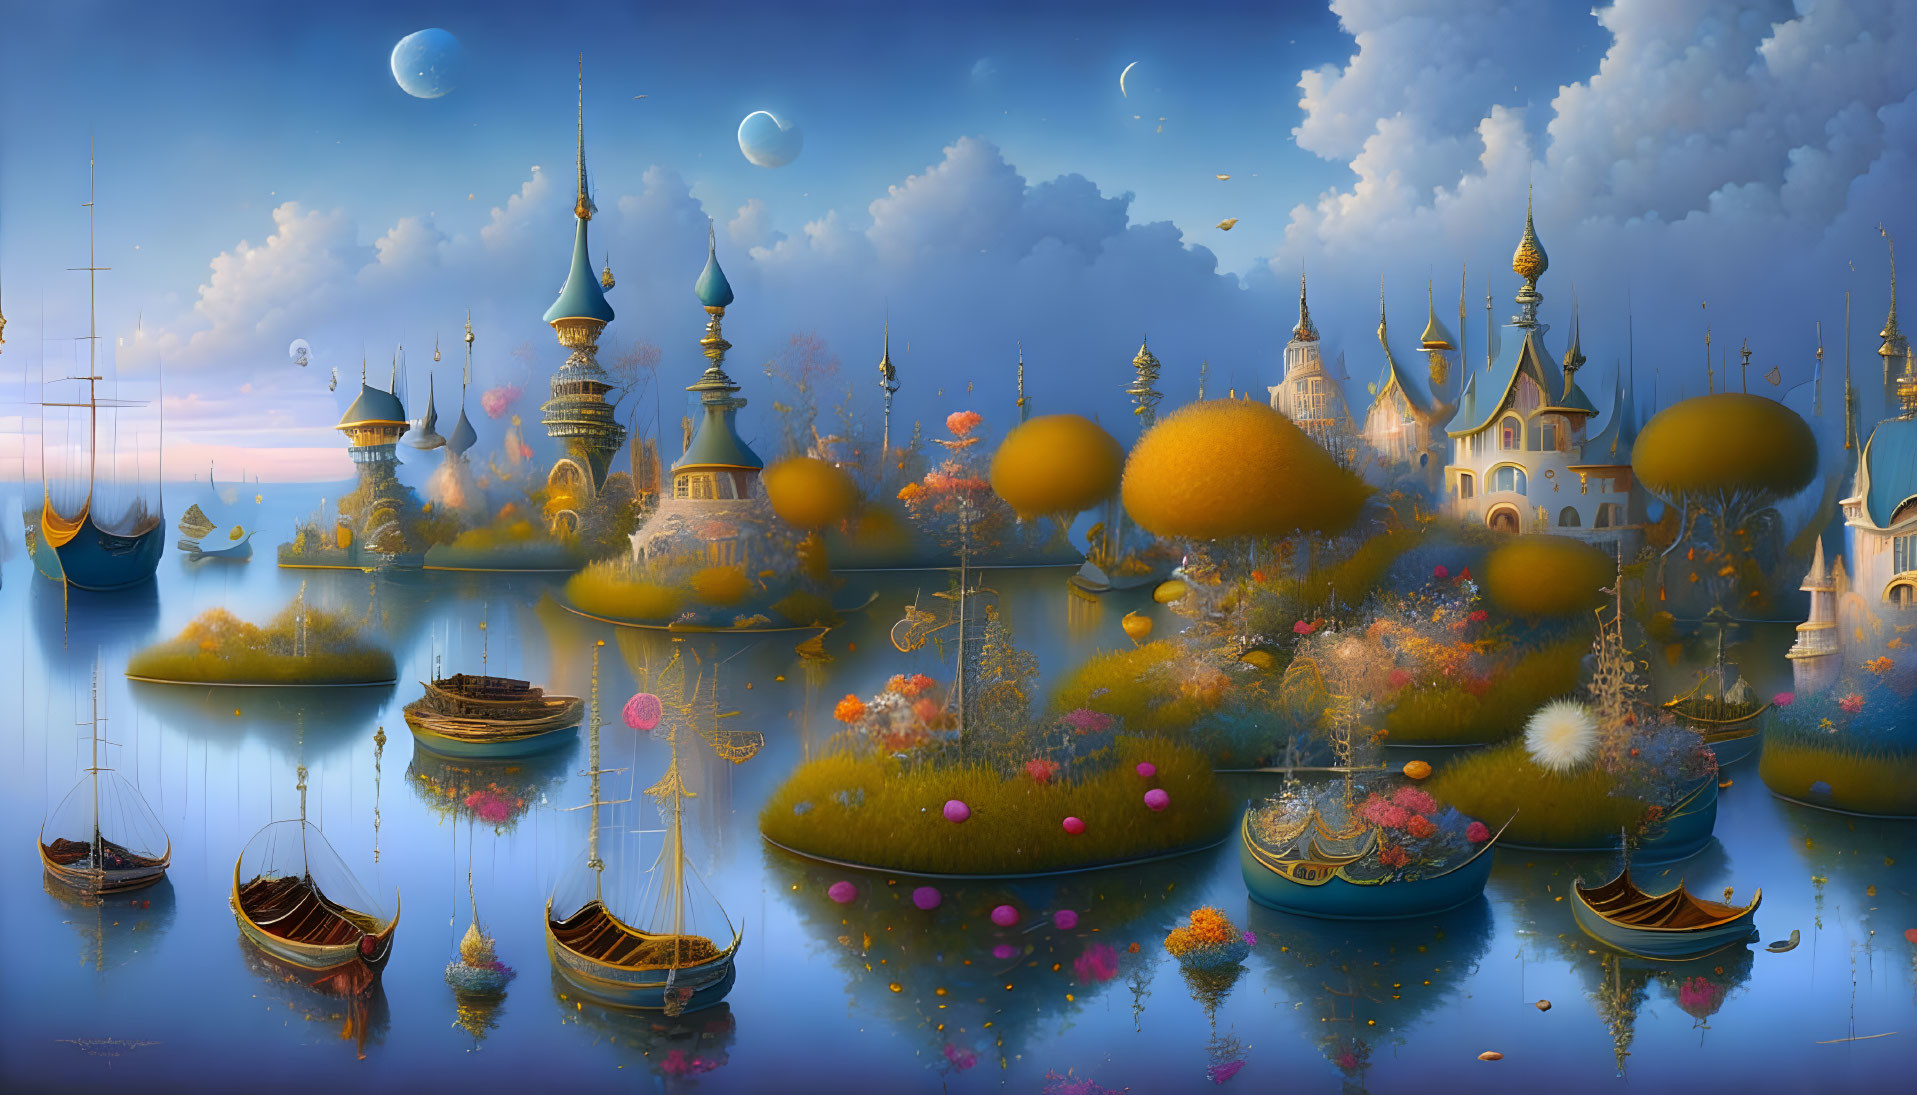 Colorful Floating Island Landscape with Moons and Castles